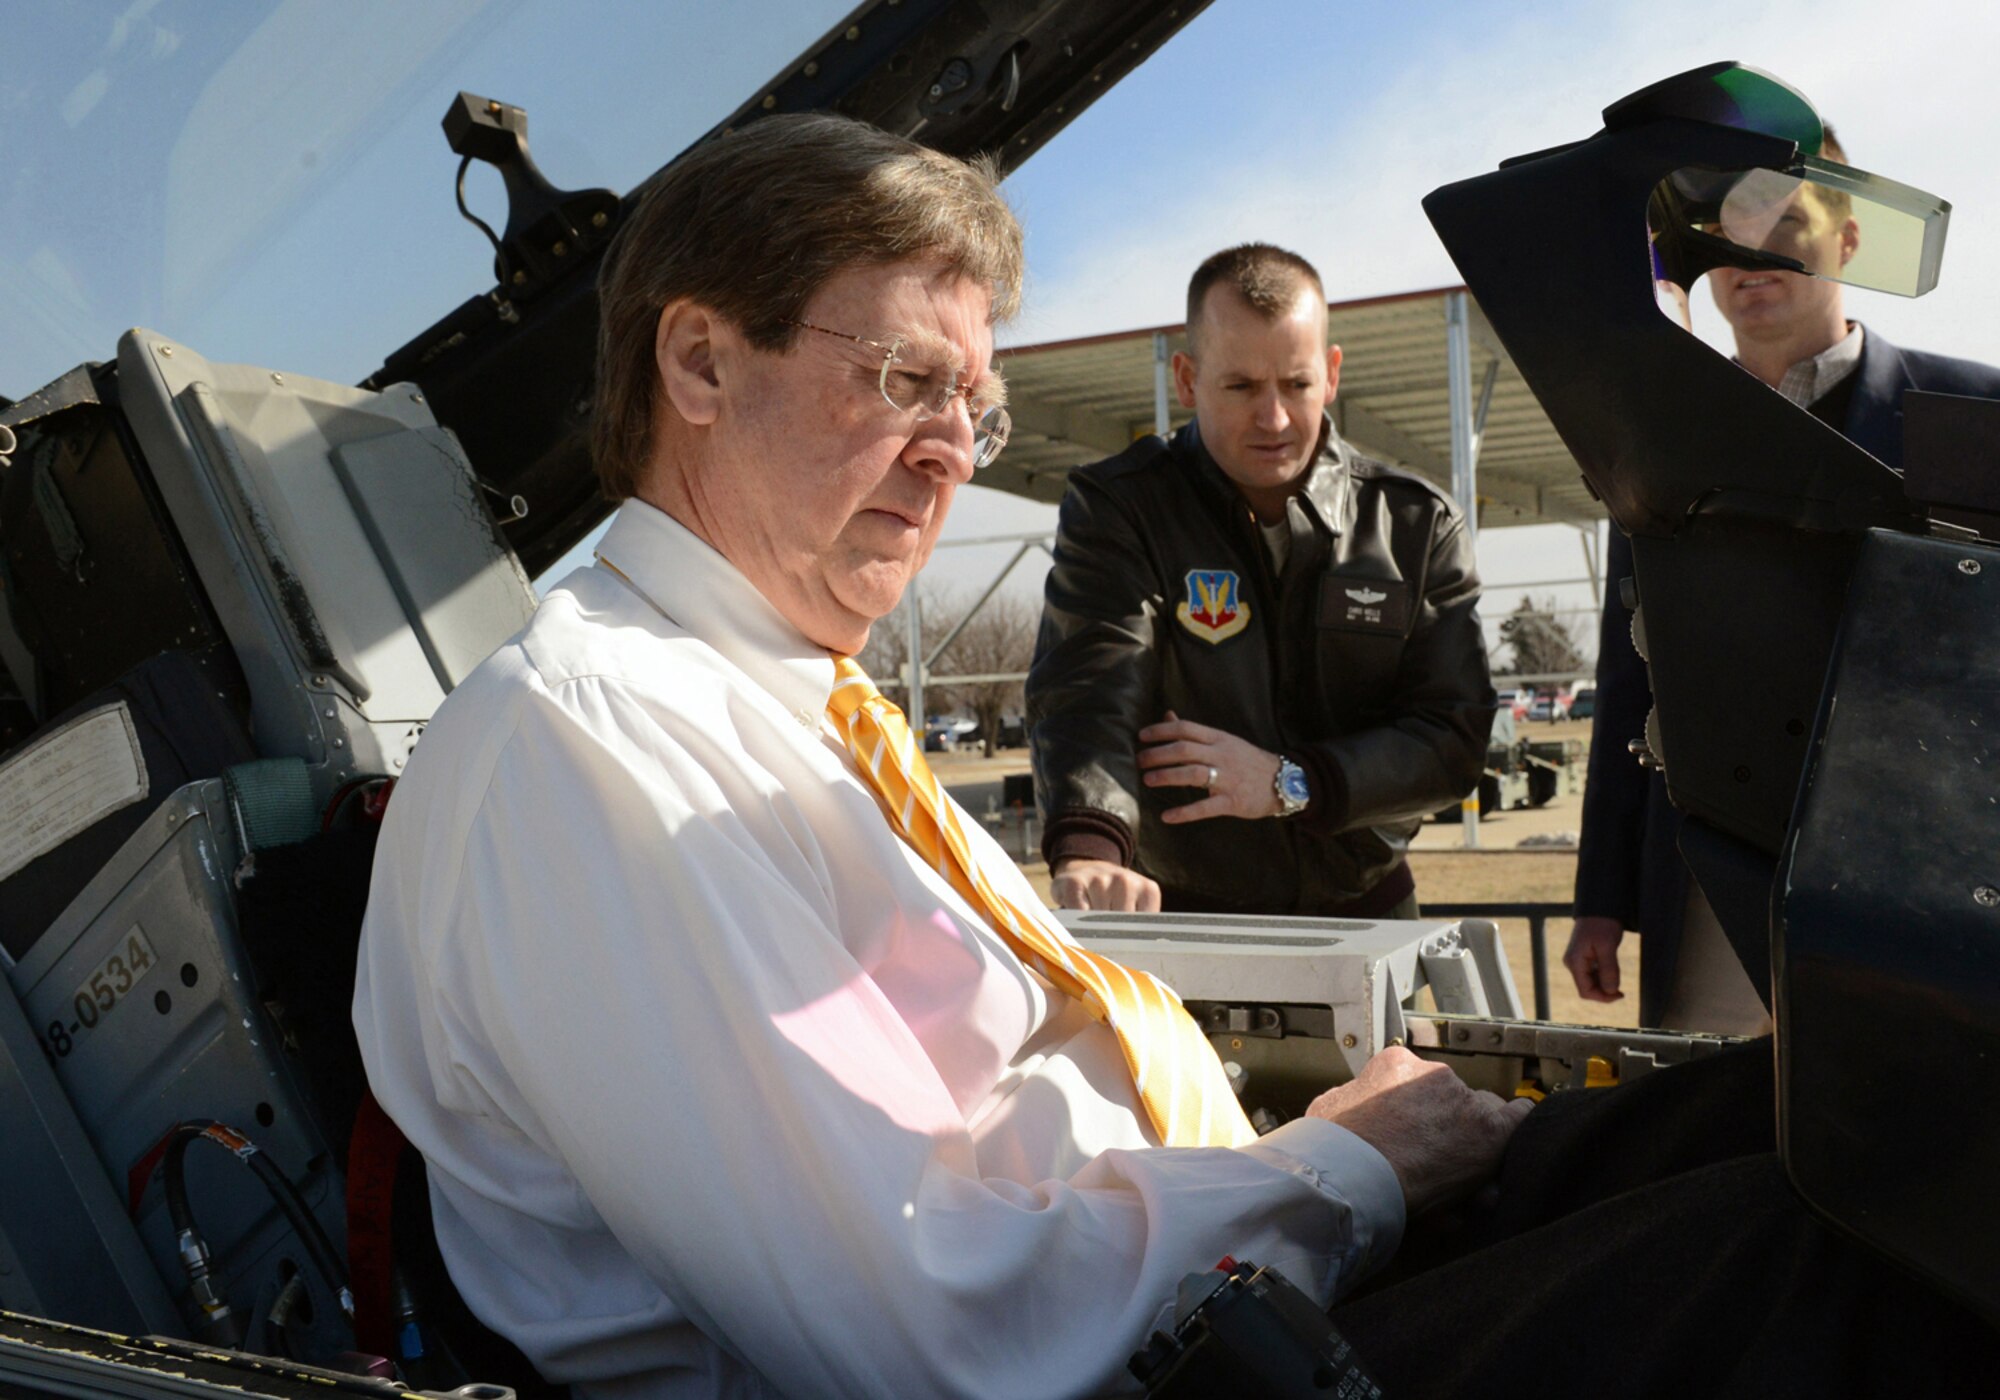 Maj. Chris Wells explains the F-16 Fighting Falcon cockpit controls to Tulsa Mayor Dewey F. Bartlett, Jr. during a visit February 25, 2015 at the Tulsa Air National Guard base, Tulsa, Okla. The mayor was hosted by 138th leadership as a community outreach event aimed at fostering good relations and educating local leaders on the mission of the wing.